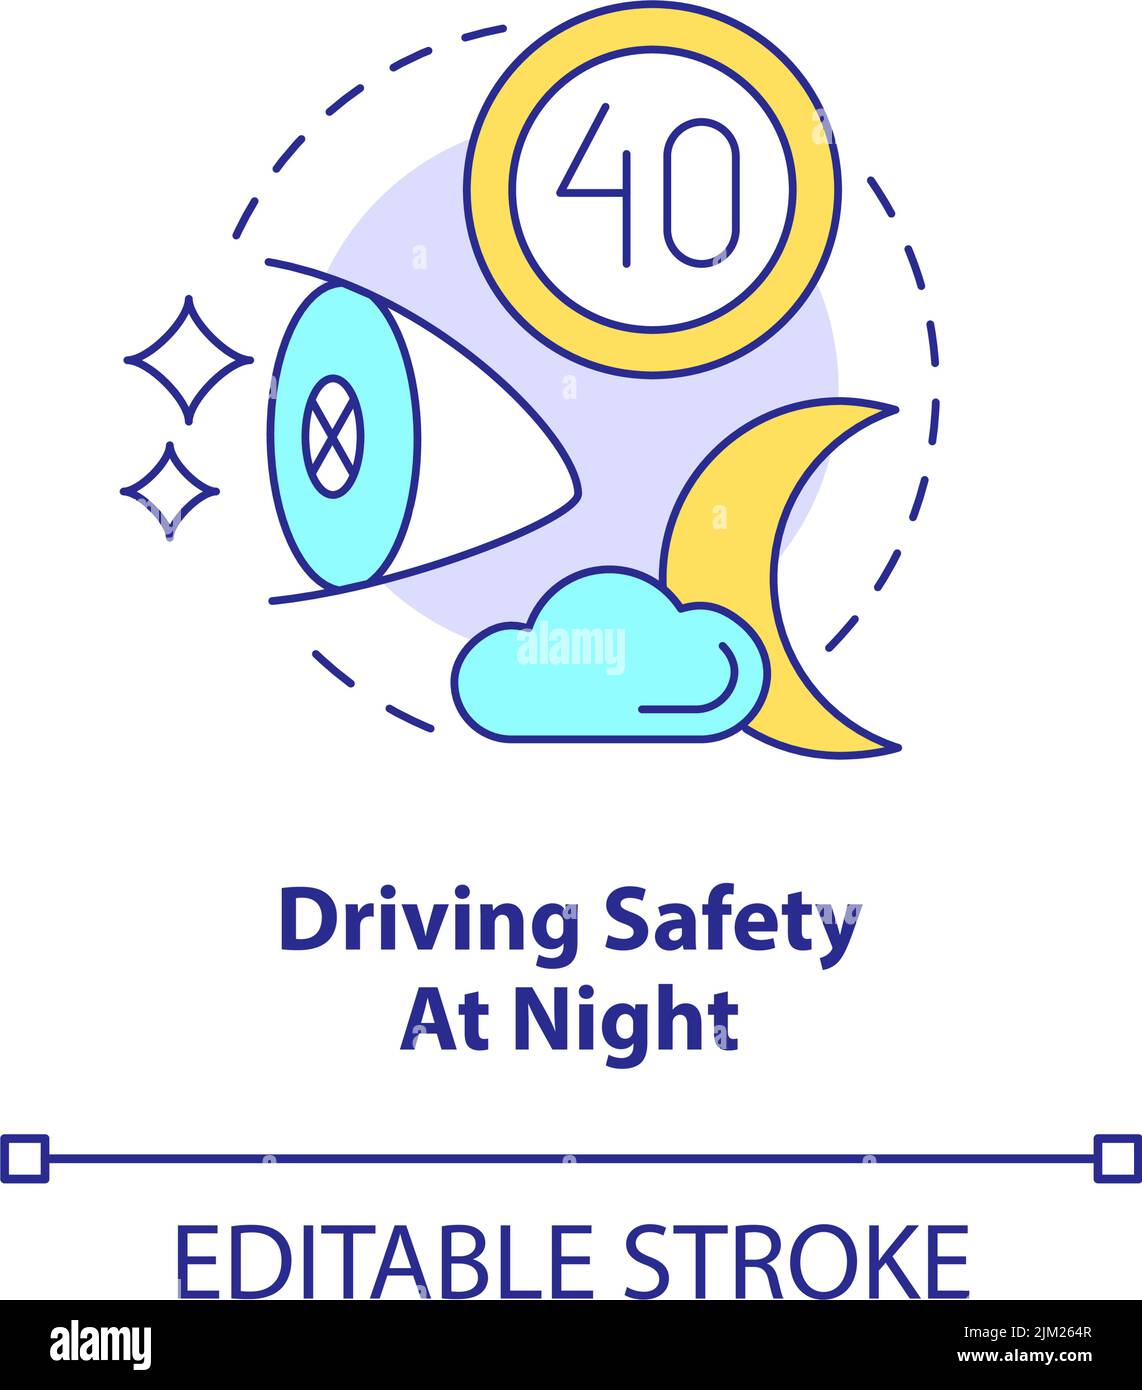 Driving safety at night concept icon Stock Vector